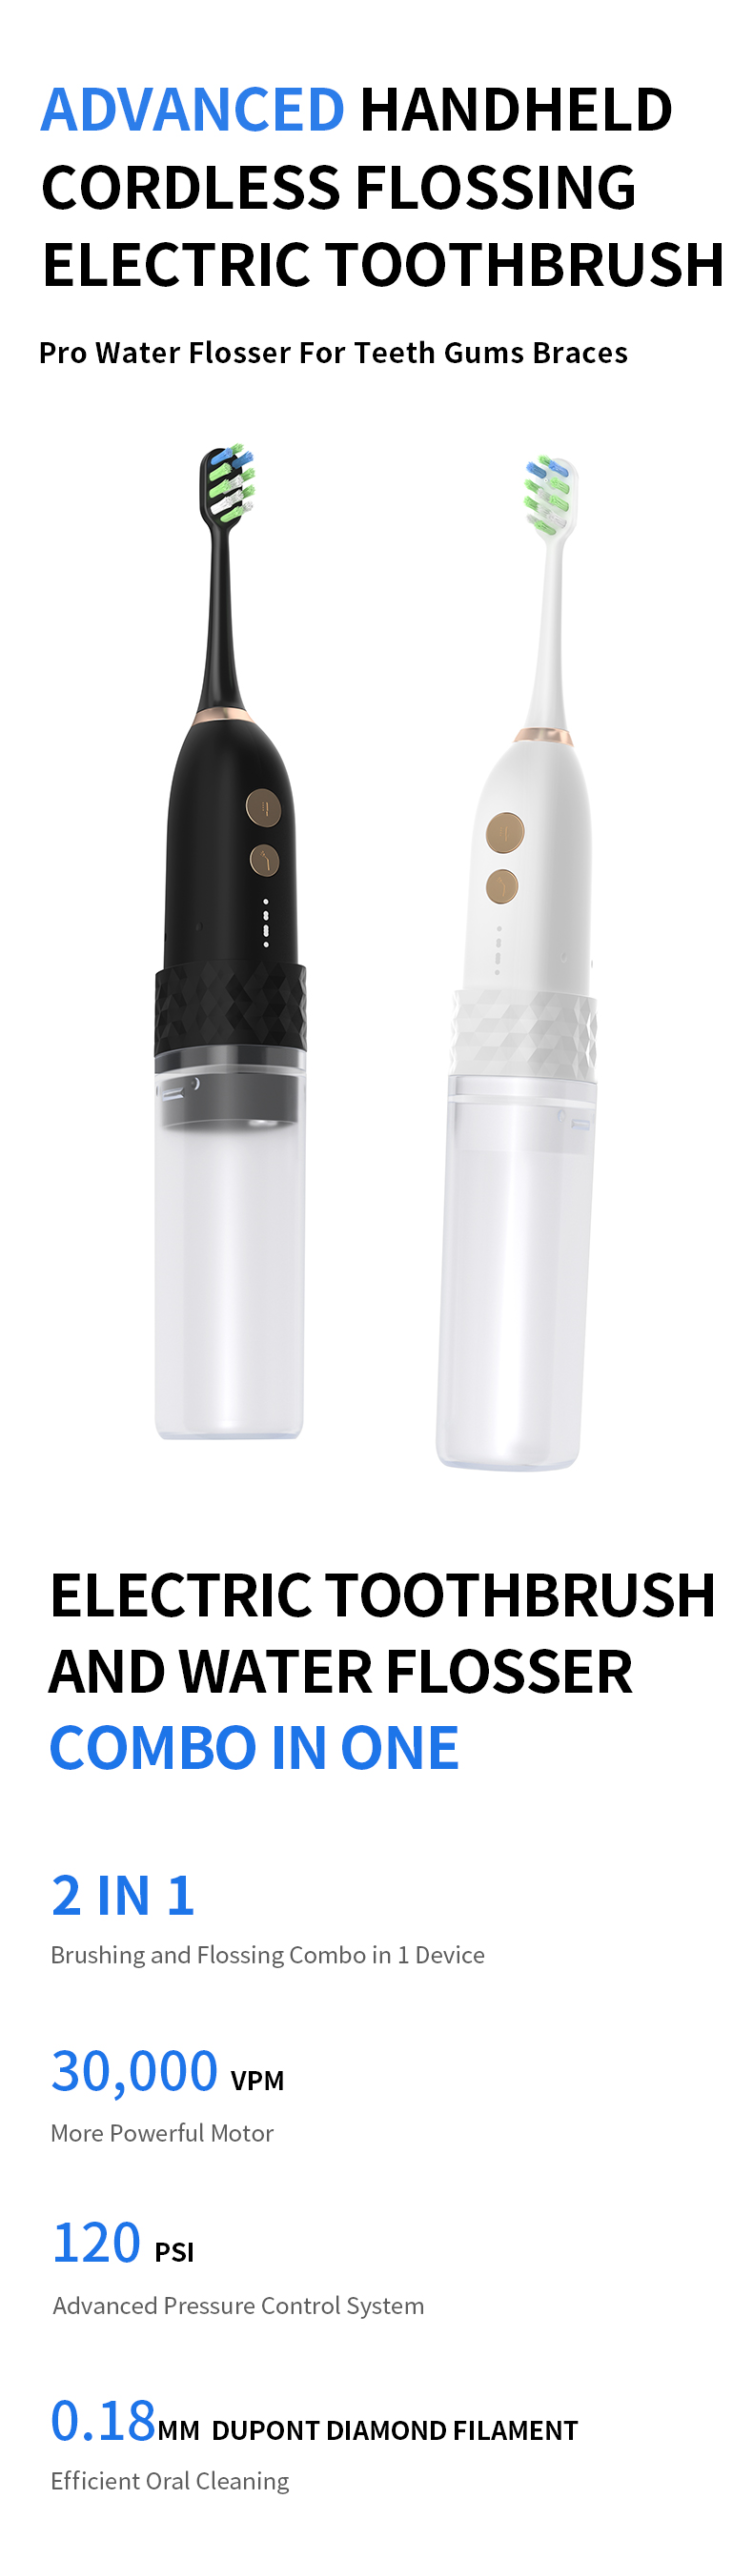 water flosser and electric toothbrush combo